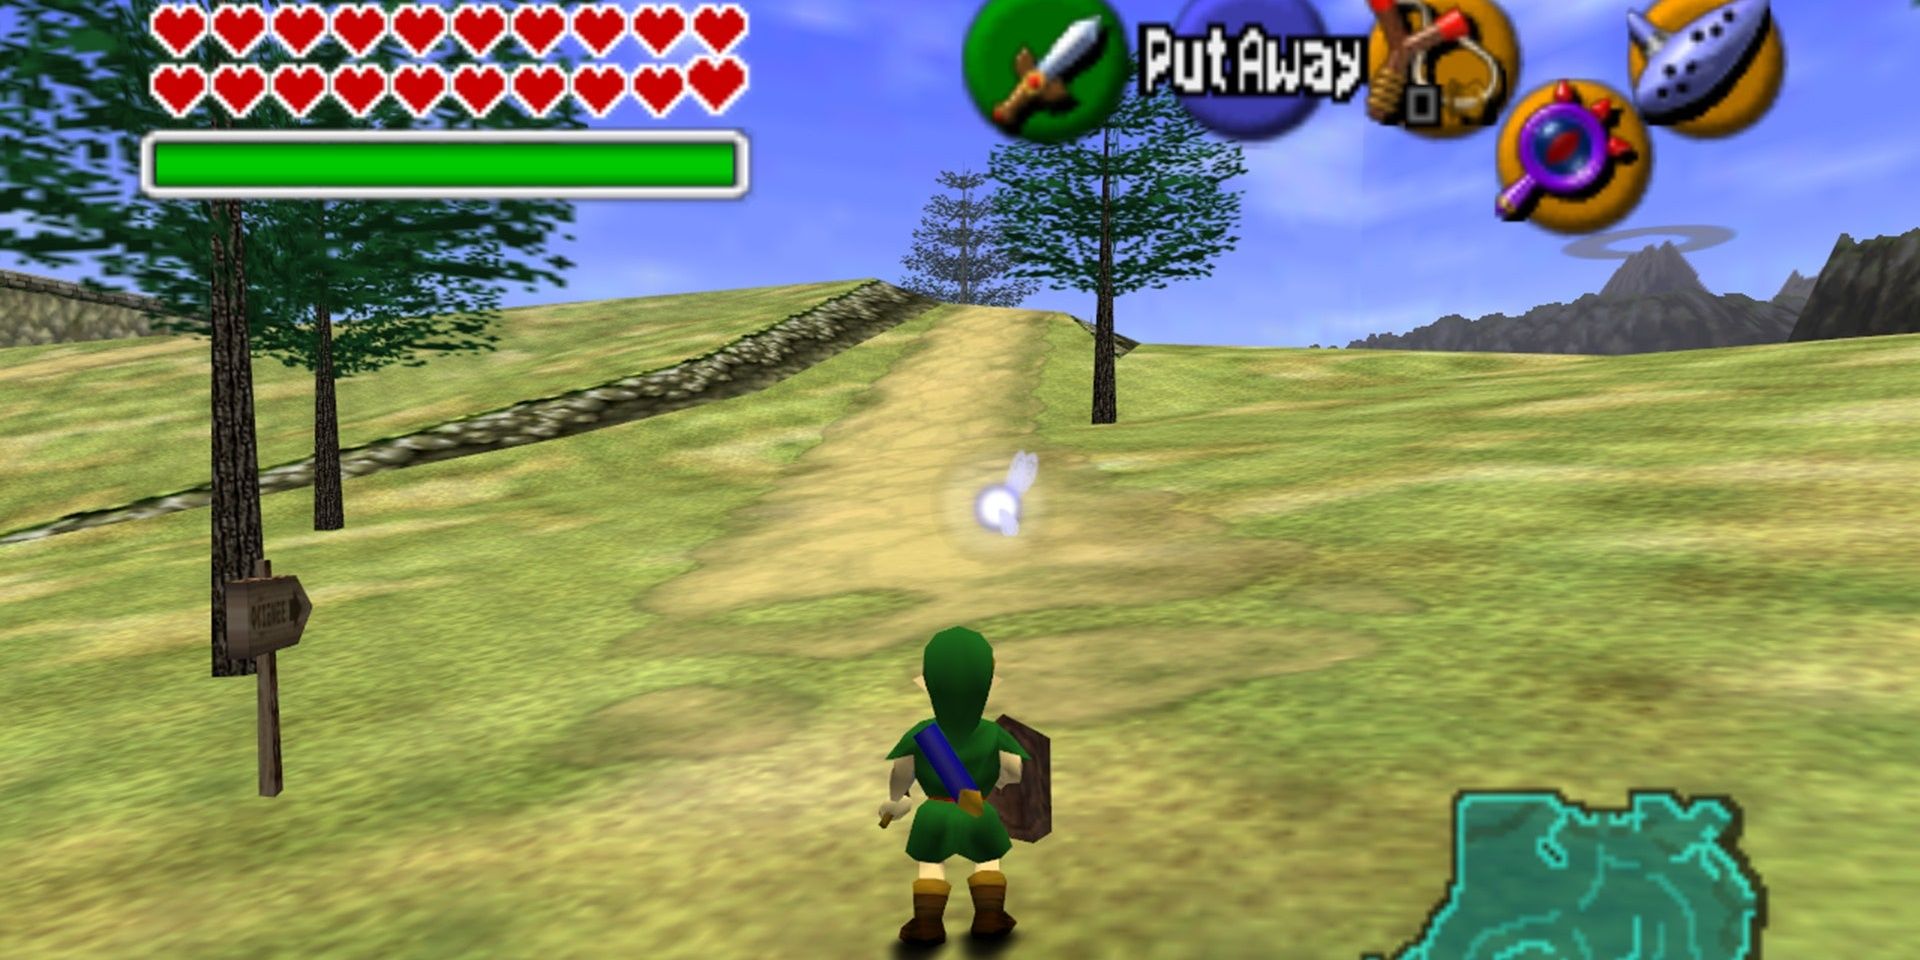 The Legend Of Zelda: Ocarina of Time - Link In Hyrule Fields. The Health Bar Is In The Top Left Corner